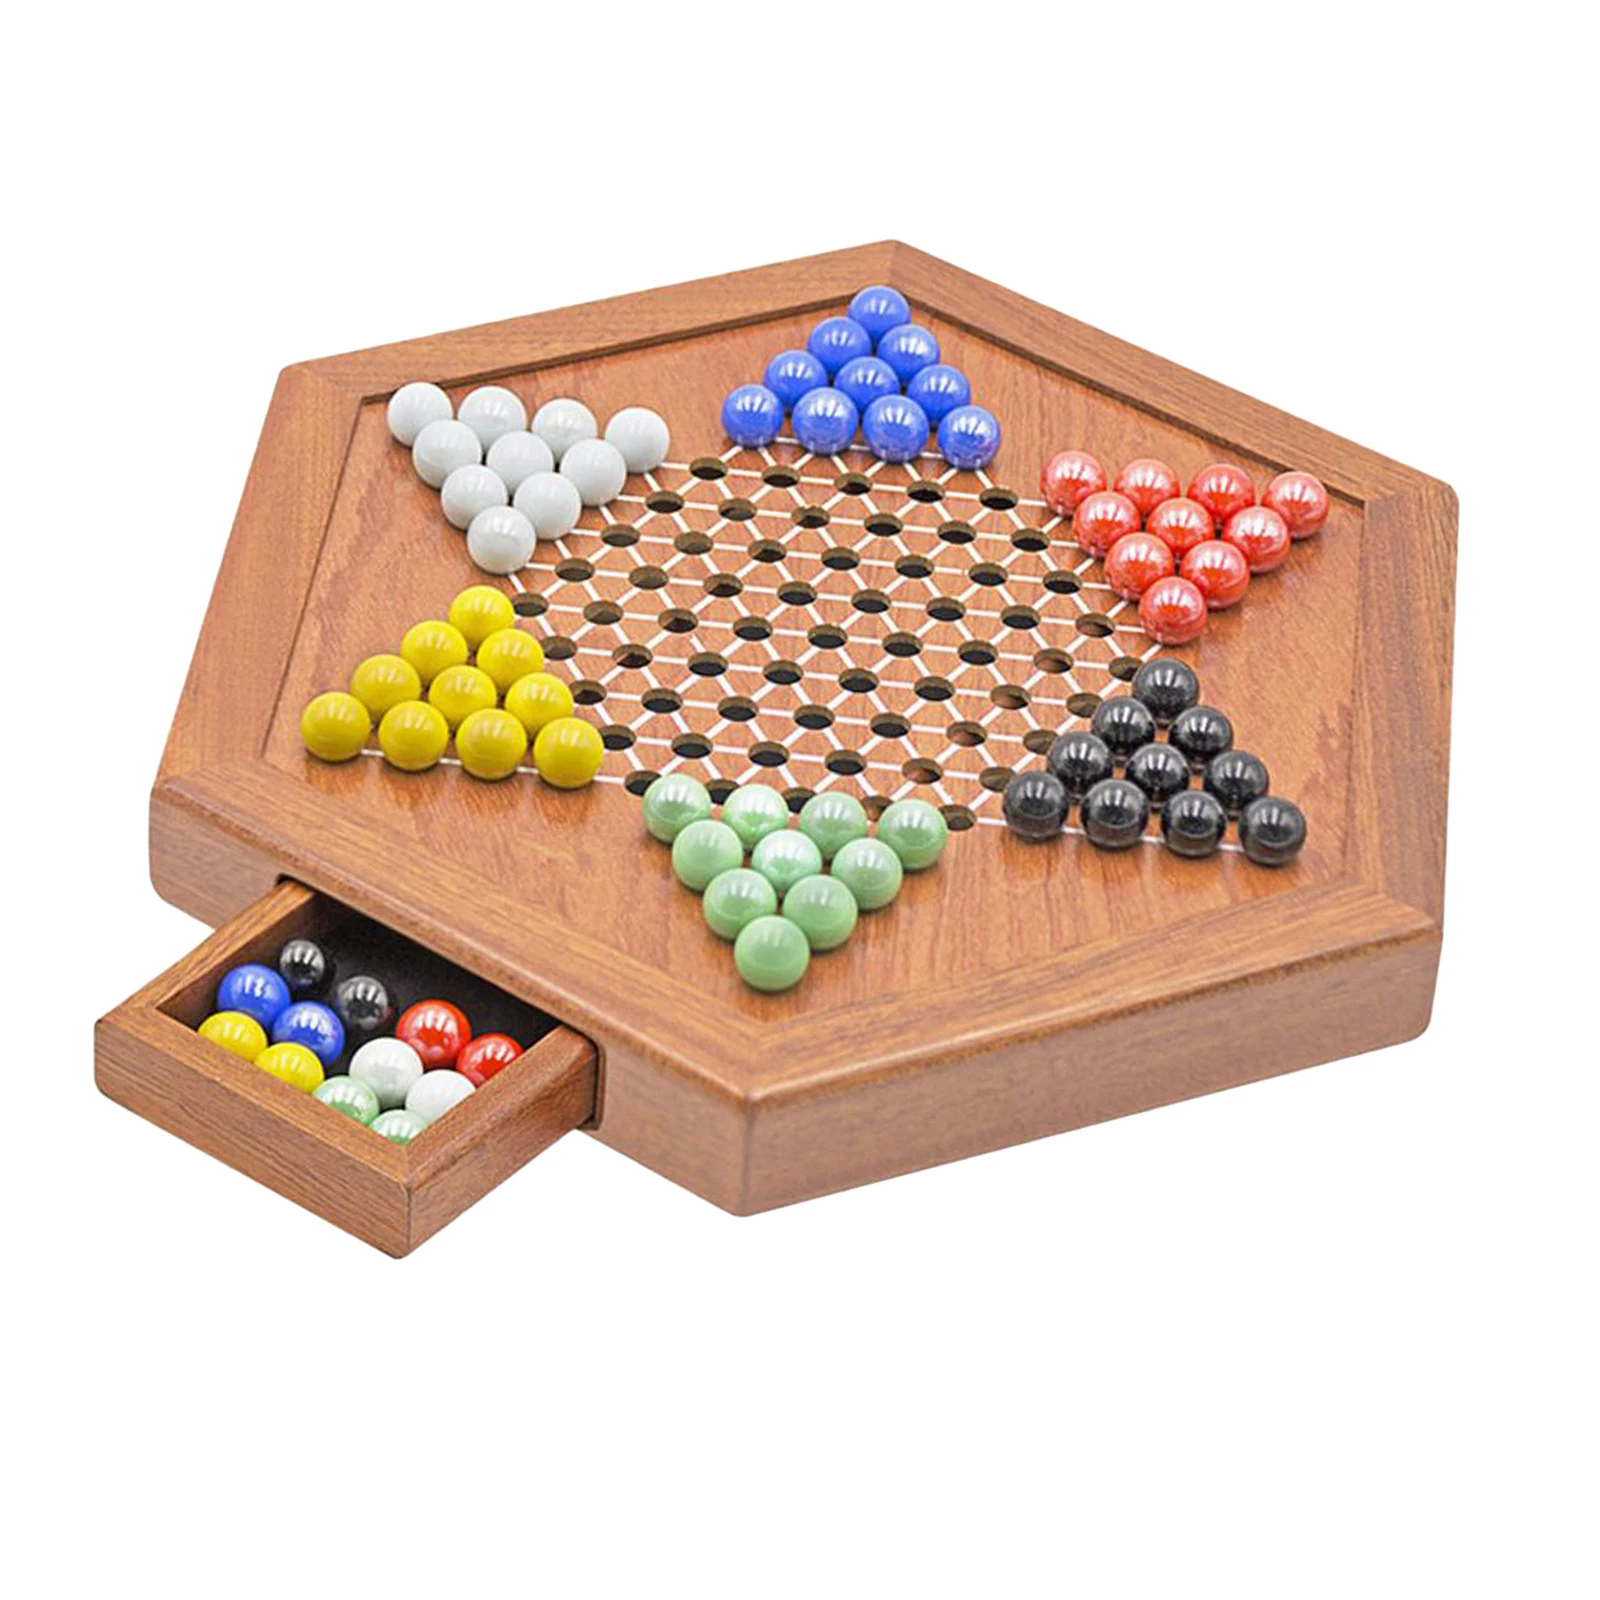 

Chinese Checkers with Drawers Board Game Chessboard Multicolor Glass Marbles Fun Toy Collection Kids Adults